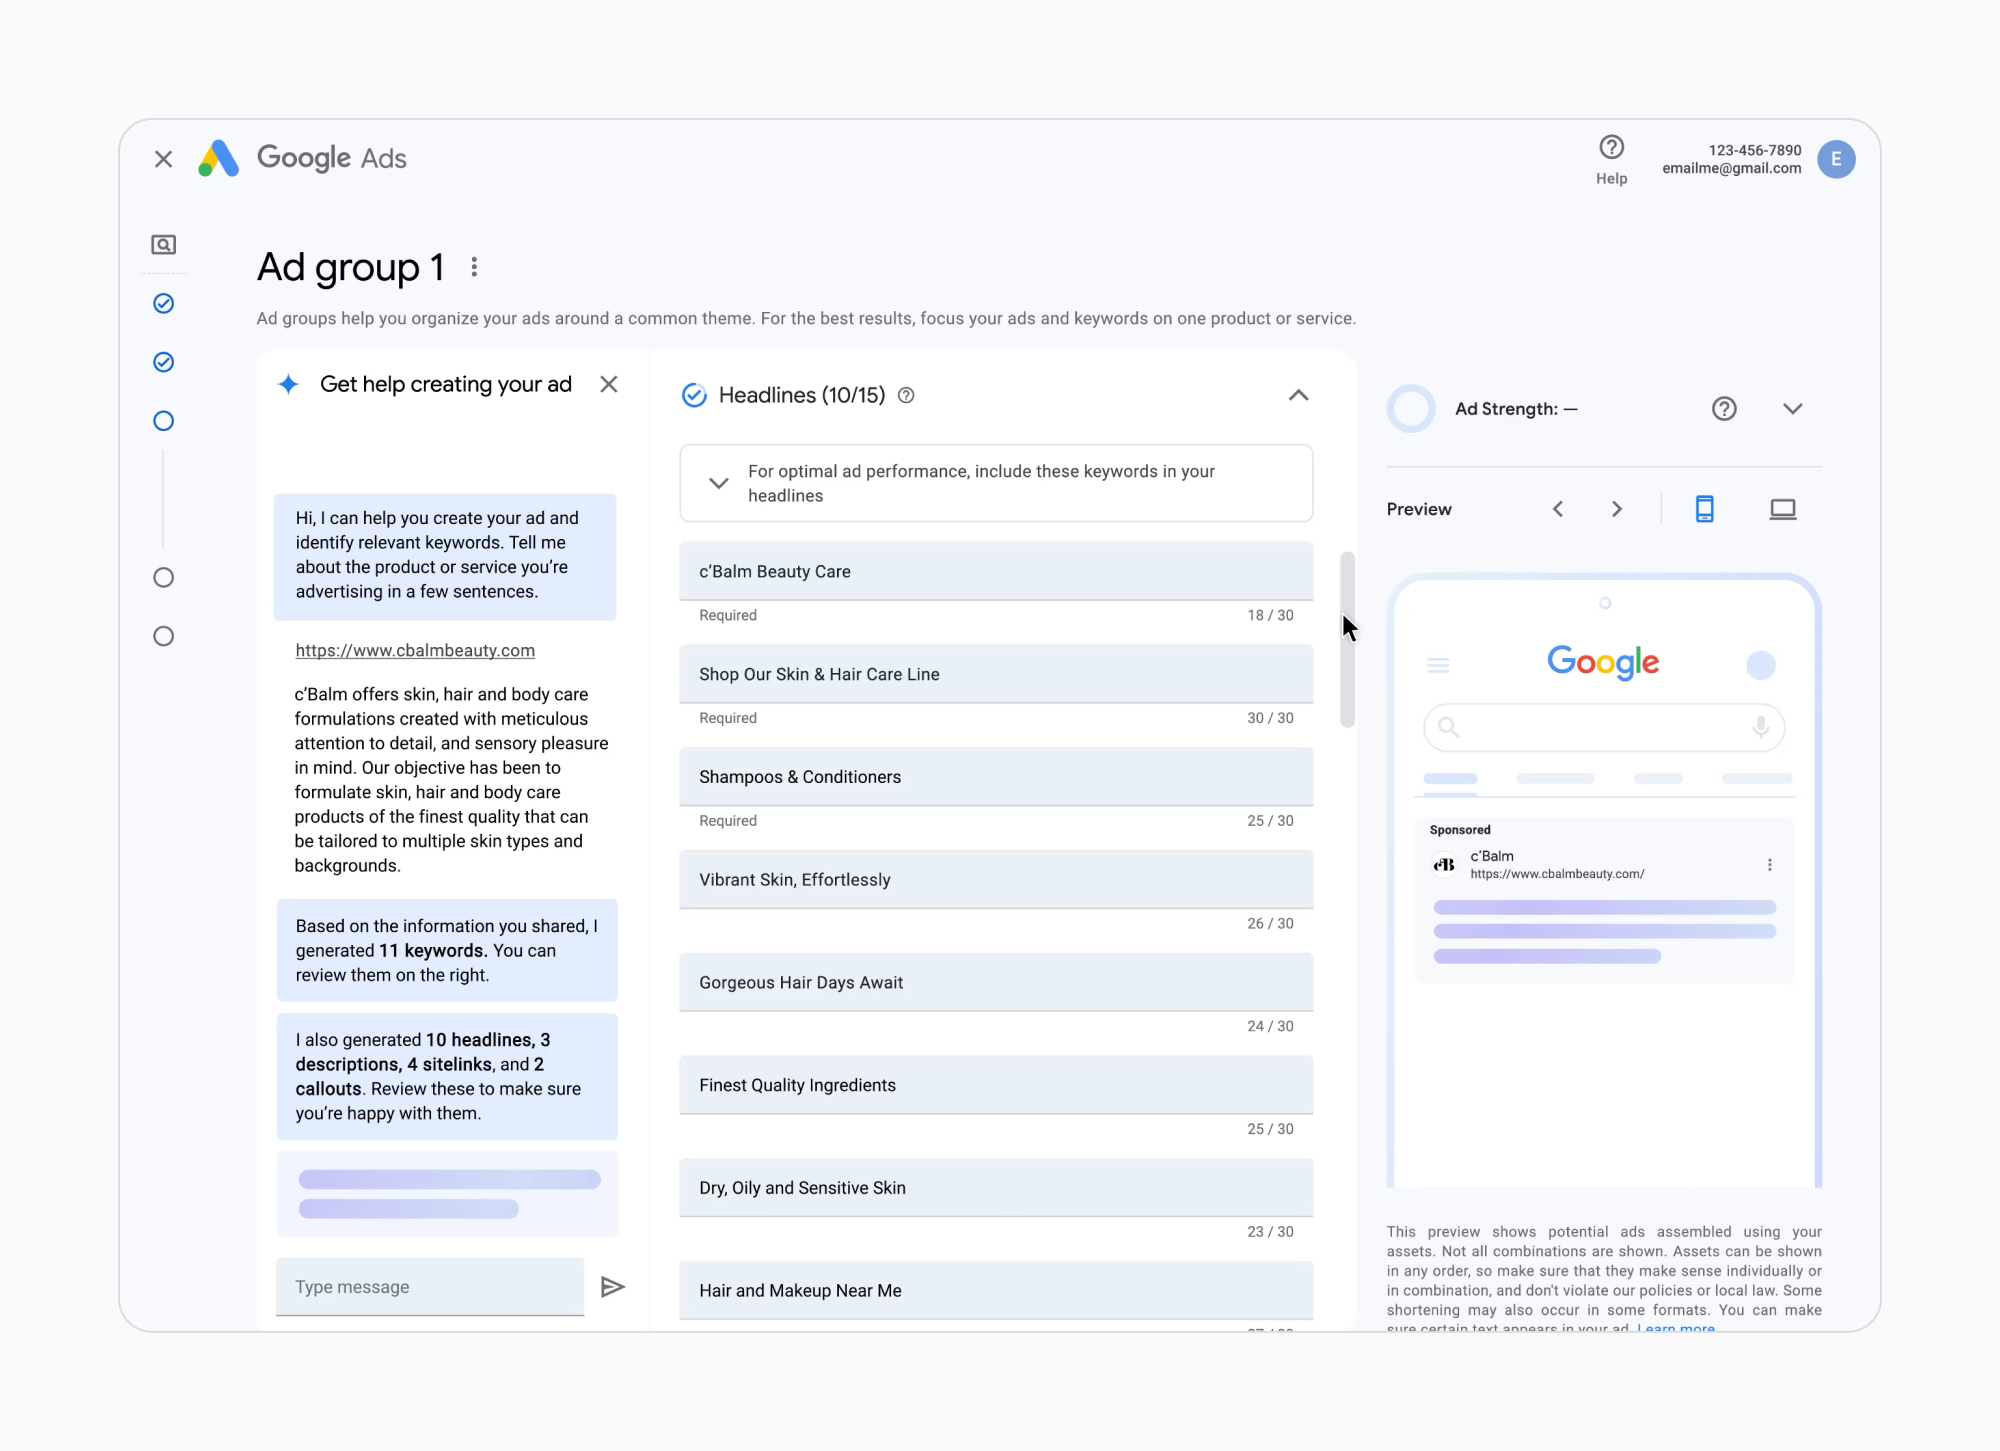 Google Marketing Live 2023: New Generative AI Features For Google Ads, Product Studio, And More